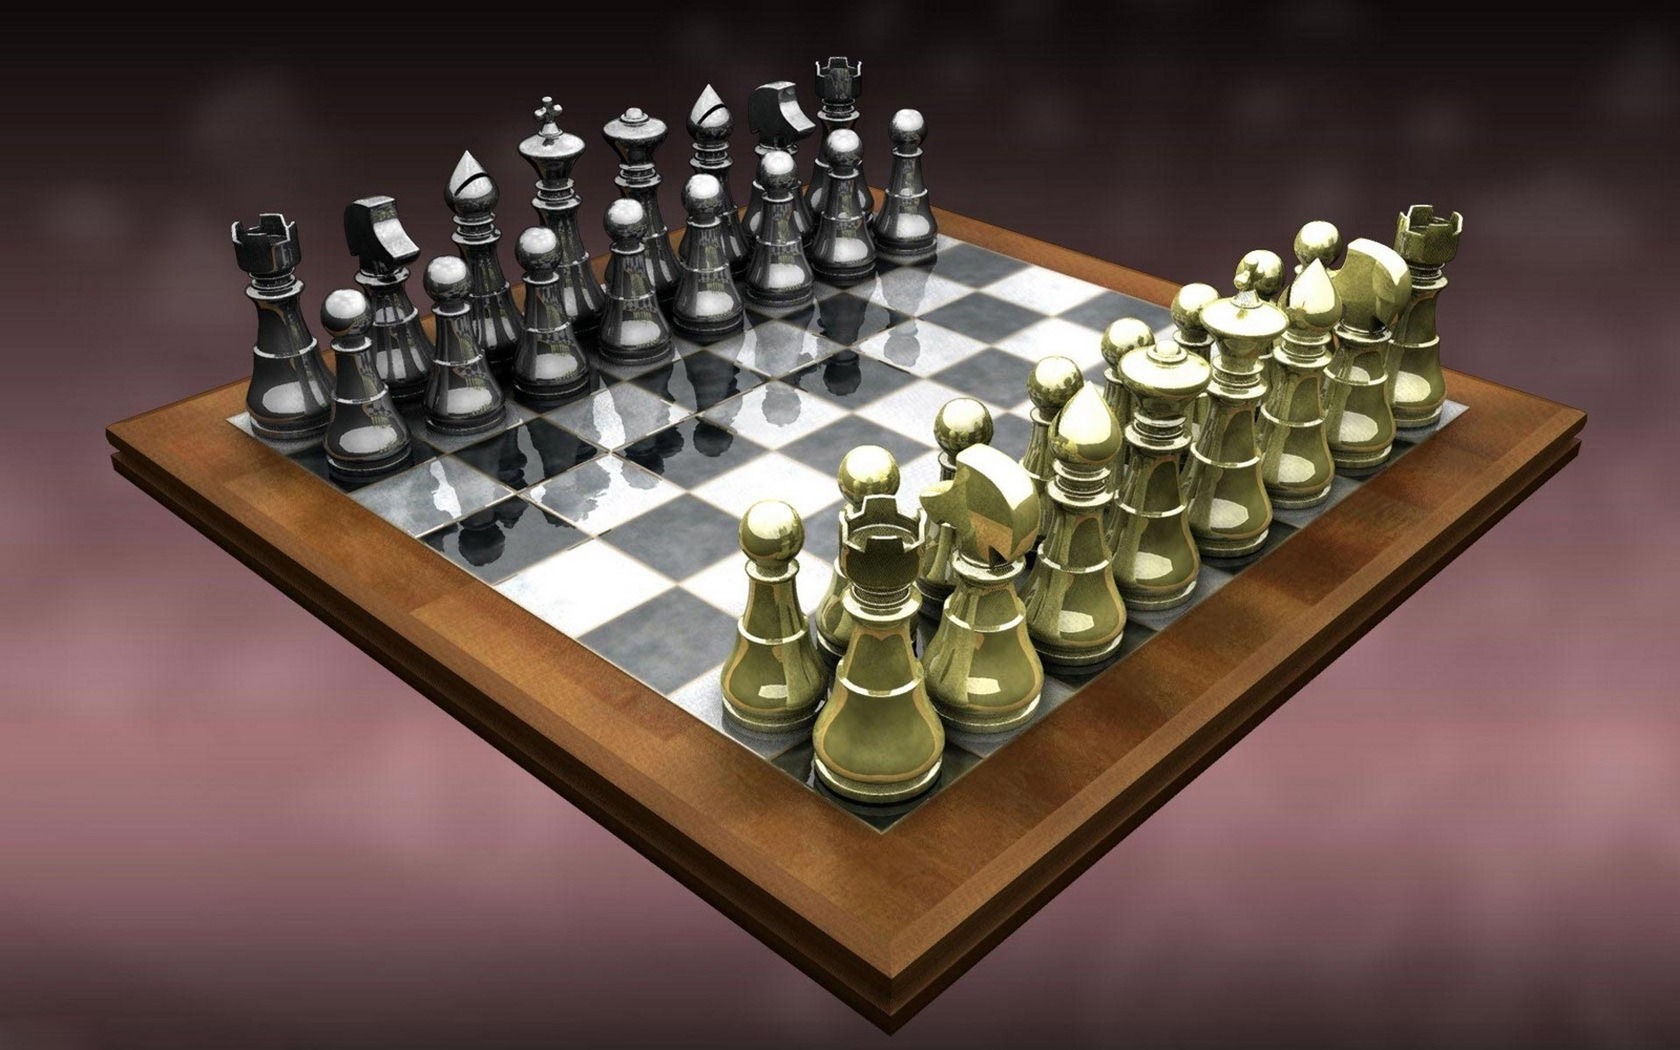 Full Hd P Chess Wallpapers Hd, Desktop Backgrounds - Chess Game Images To Download - HD Wallpaper 